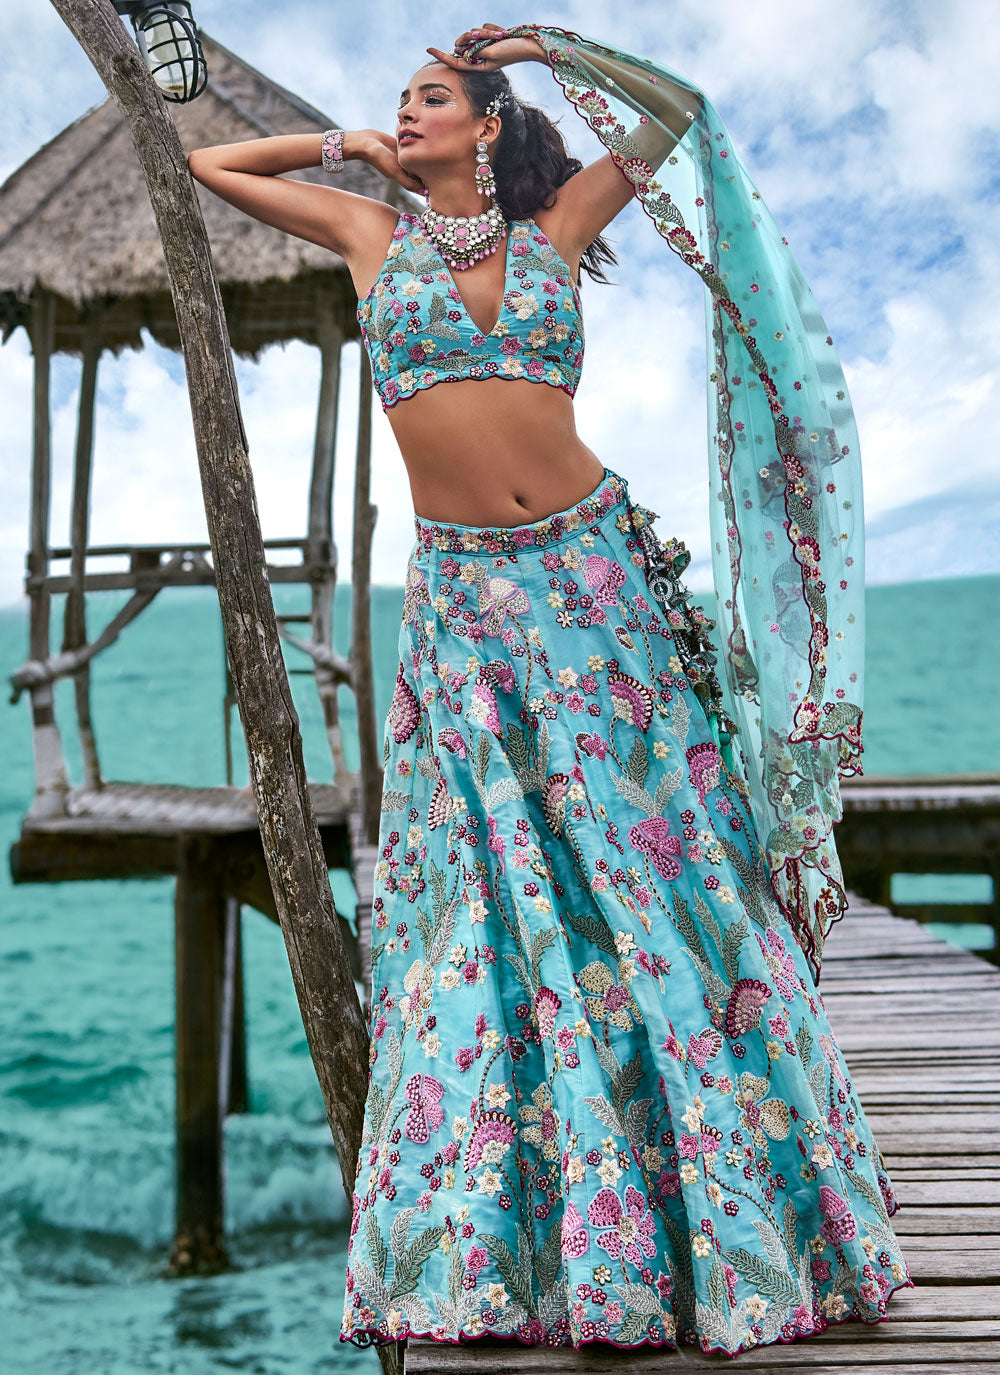 Embroidered, Sequins And Thread Work Organza Lehenga Choli In Turquoise